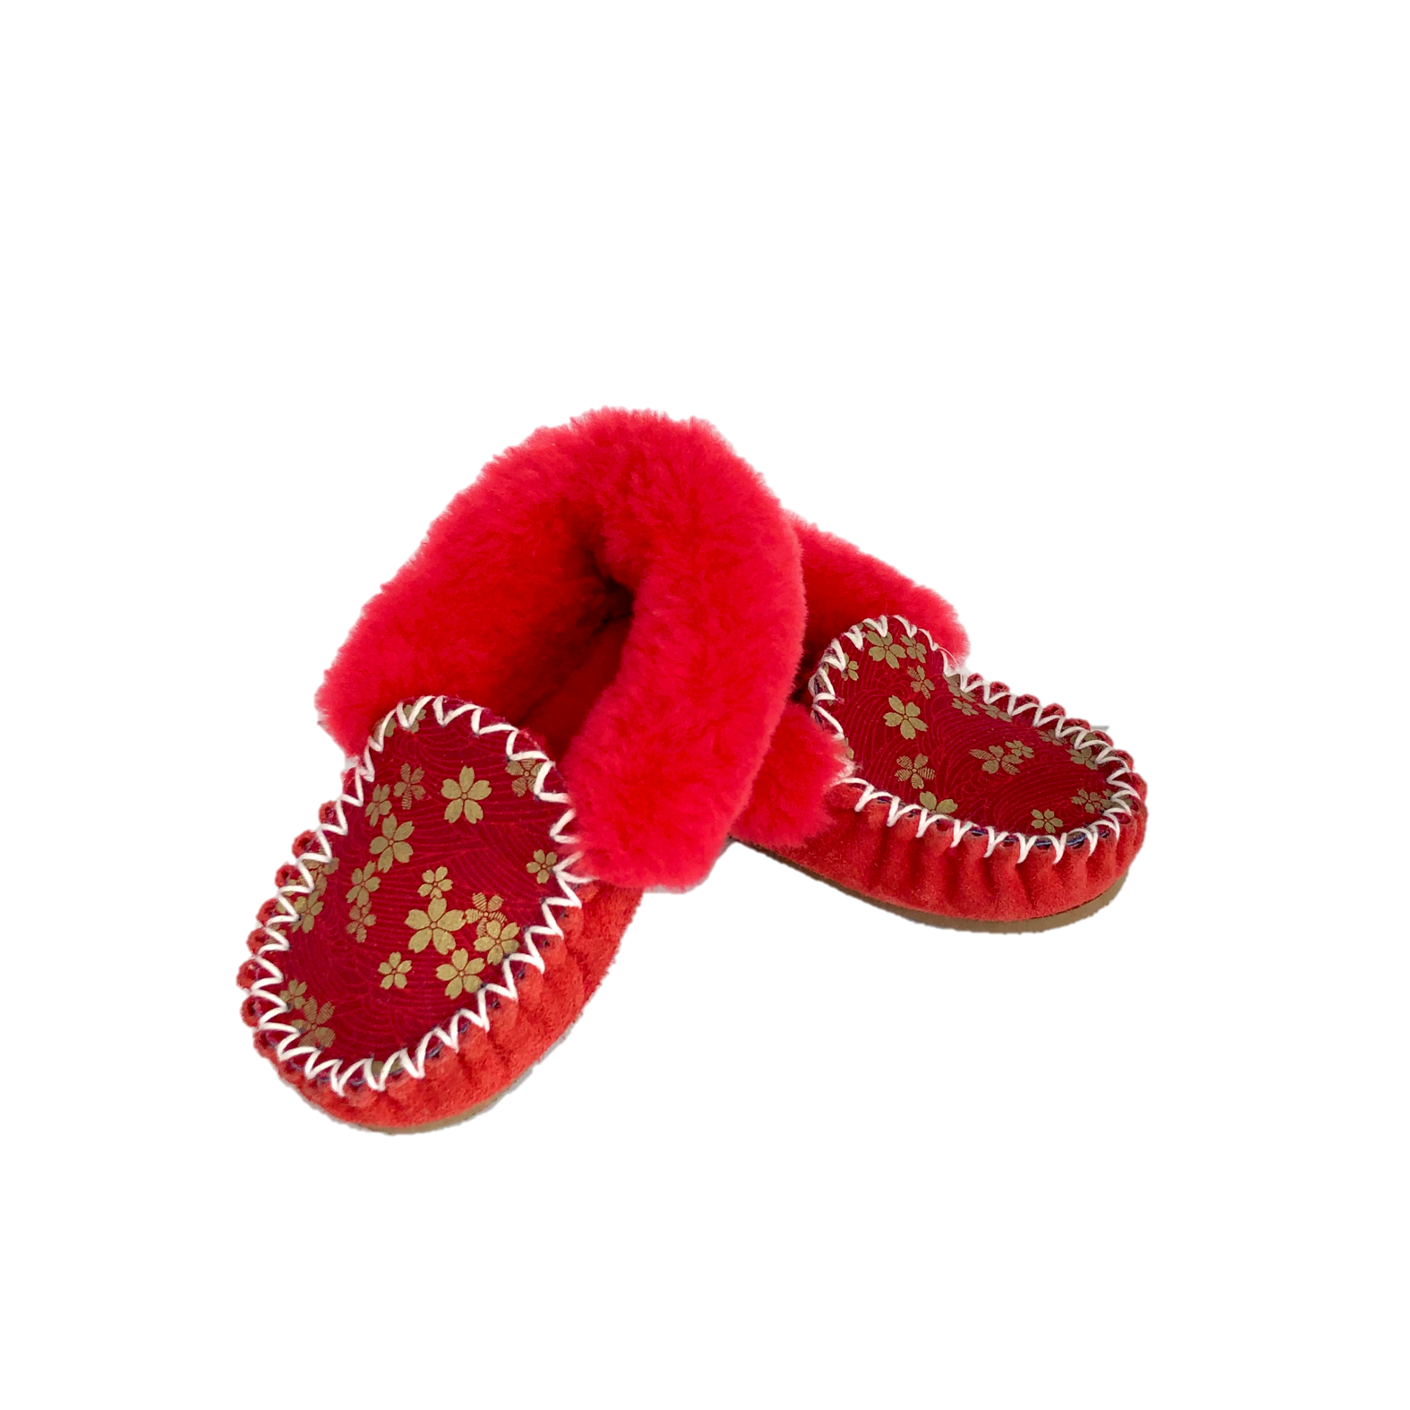 CLEARANCE TRADITIONAL MOCCASINS SCARLET - AU KIDS 12 (approx. 5 year old)